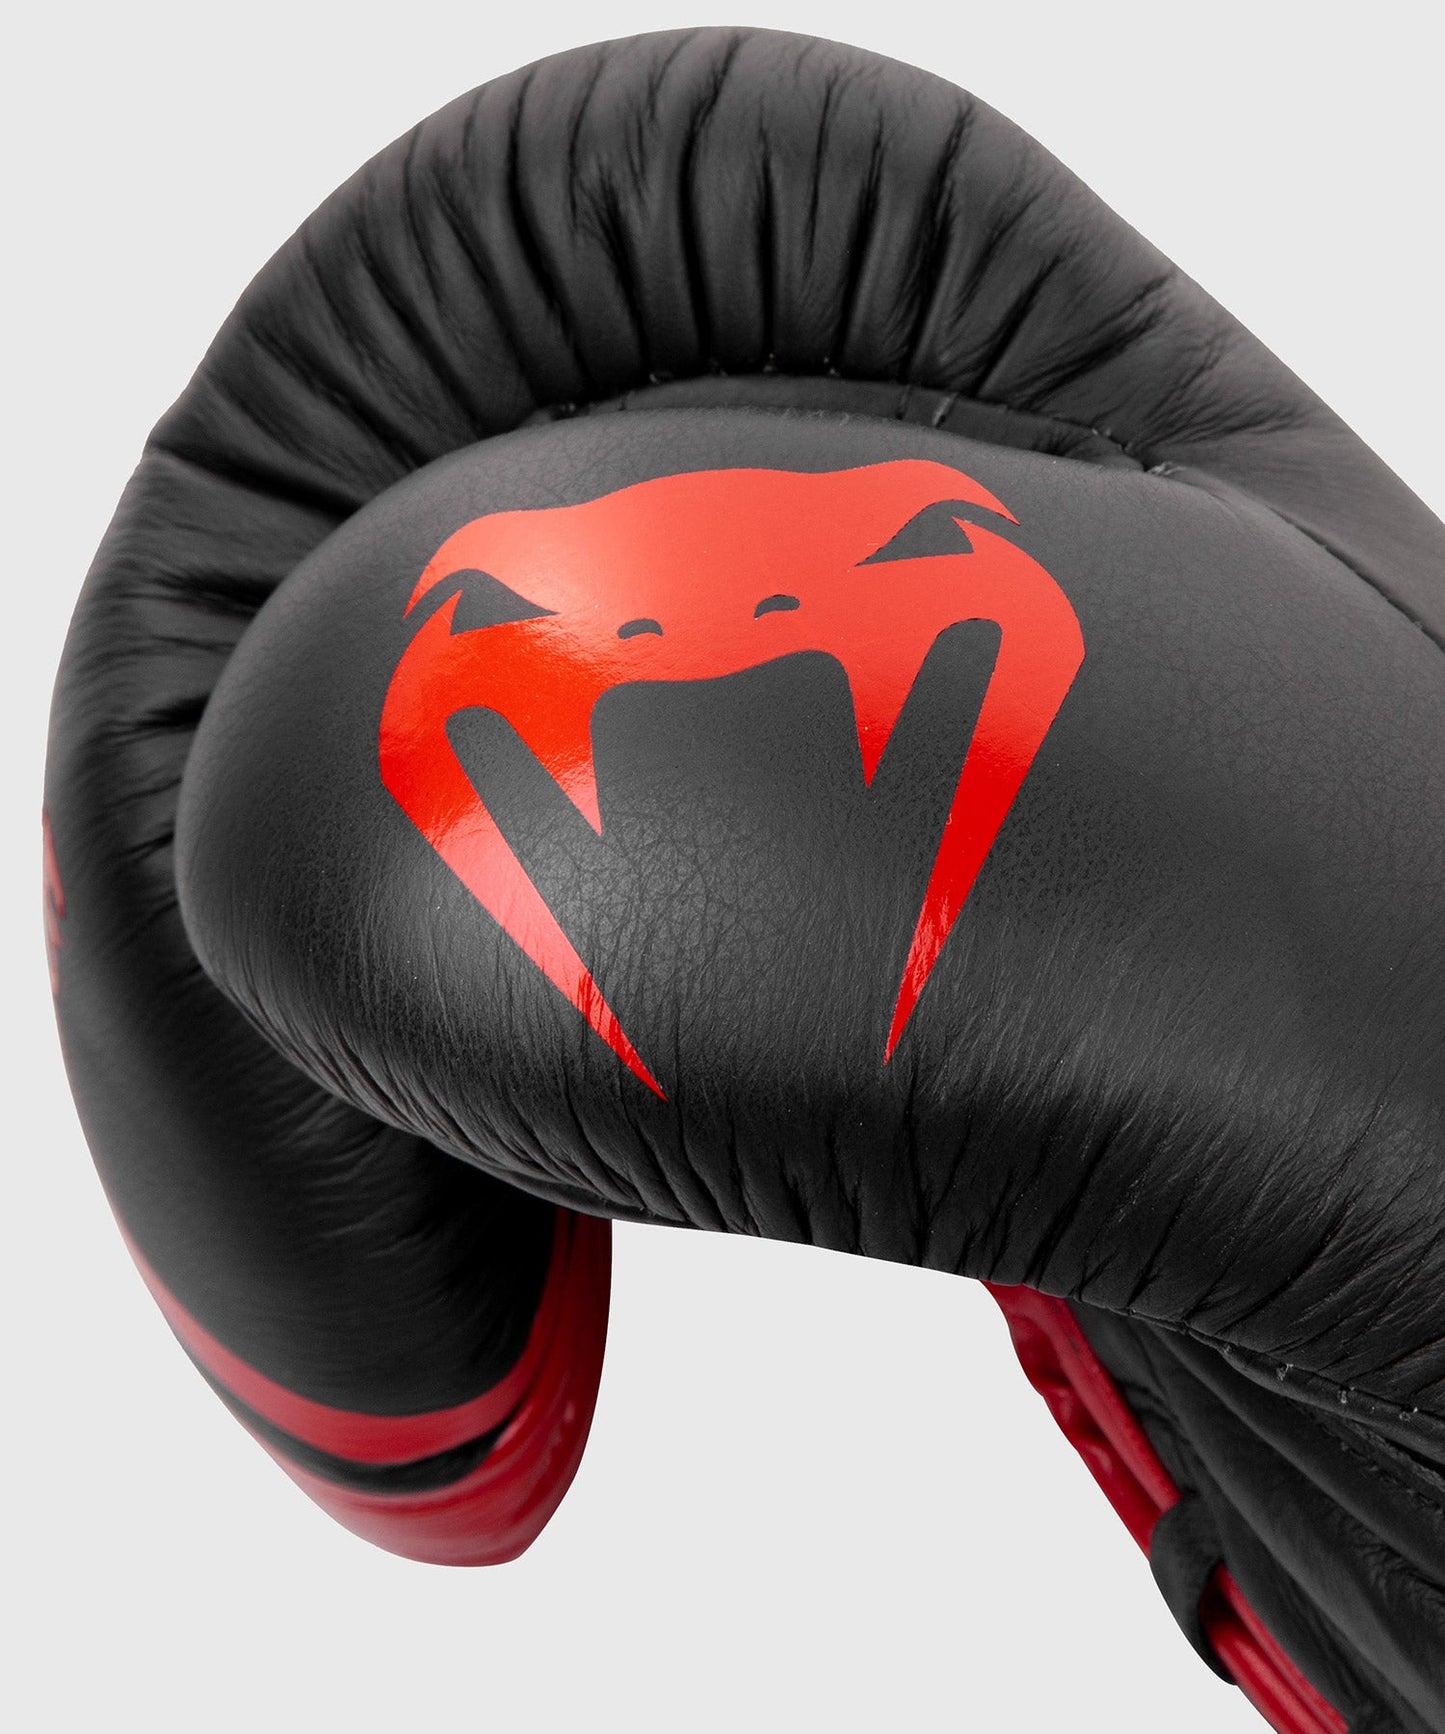 Venum Shield Pro Boxing Gloves - With Laces - Black/Red